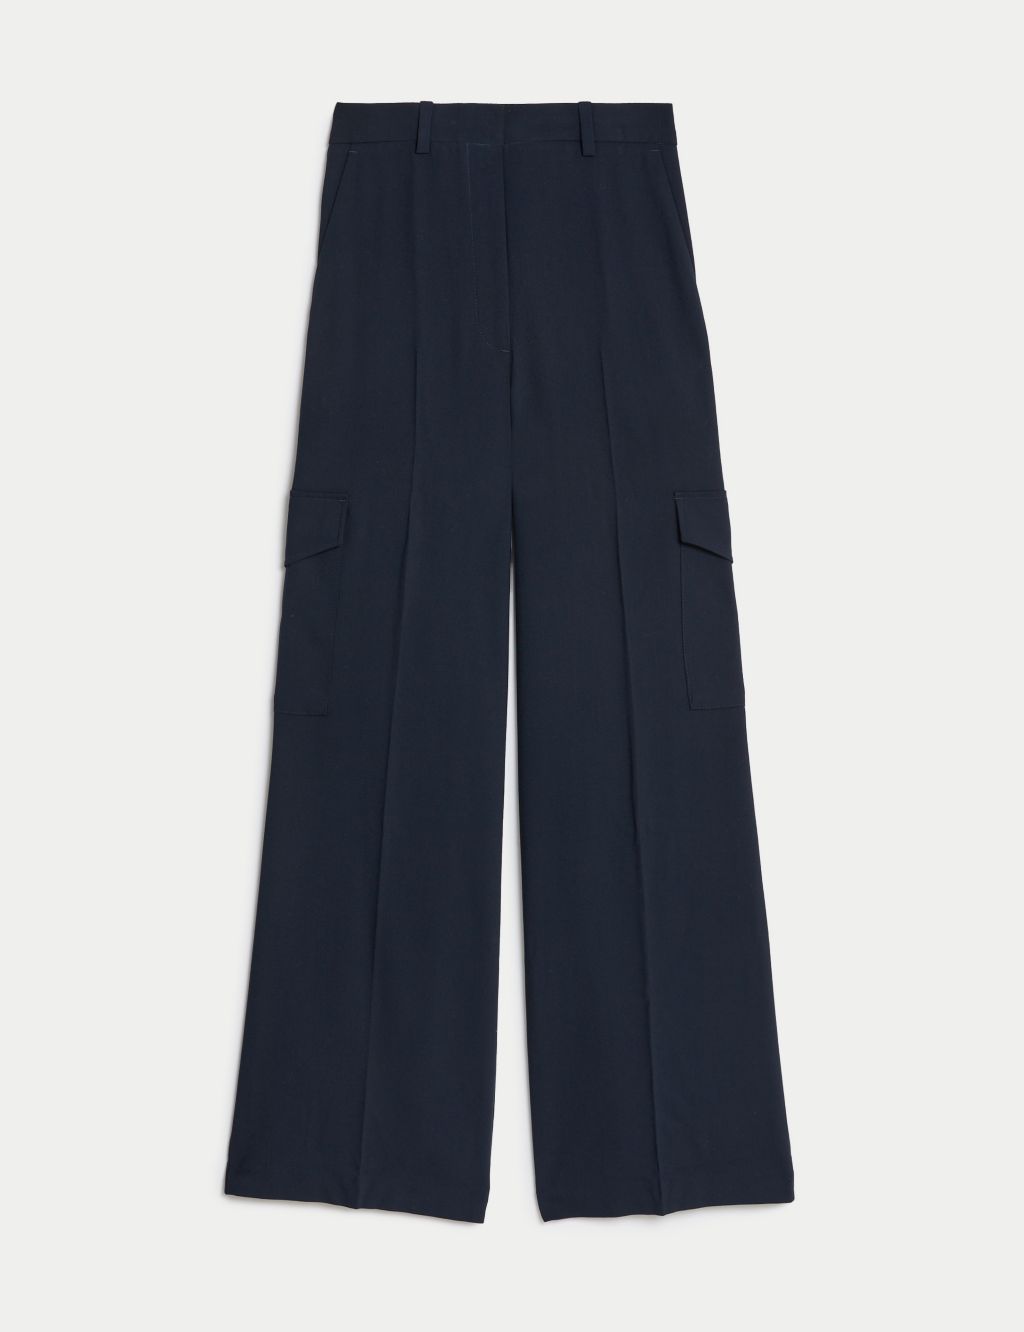 Cargo Wide Leg Trousers image 2